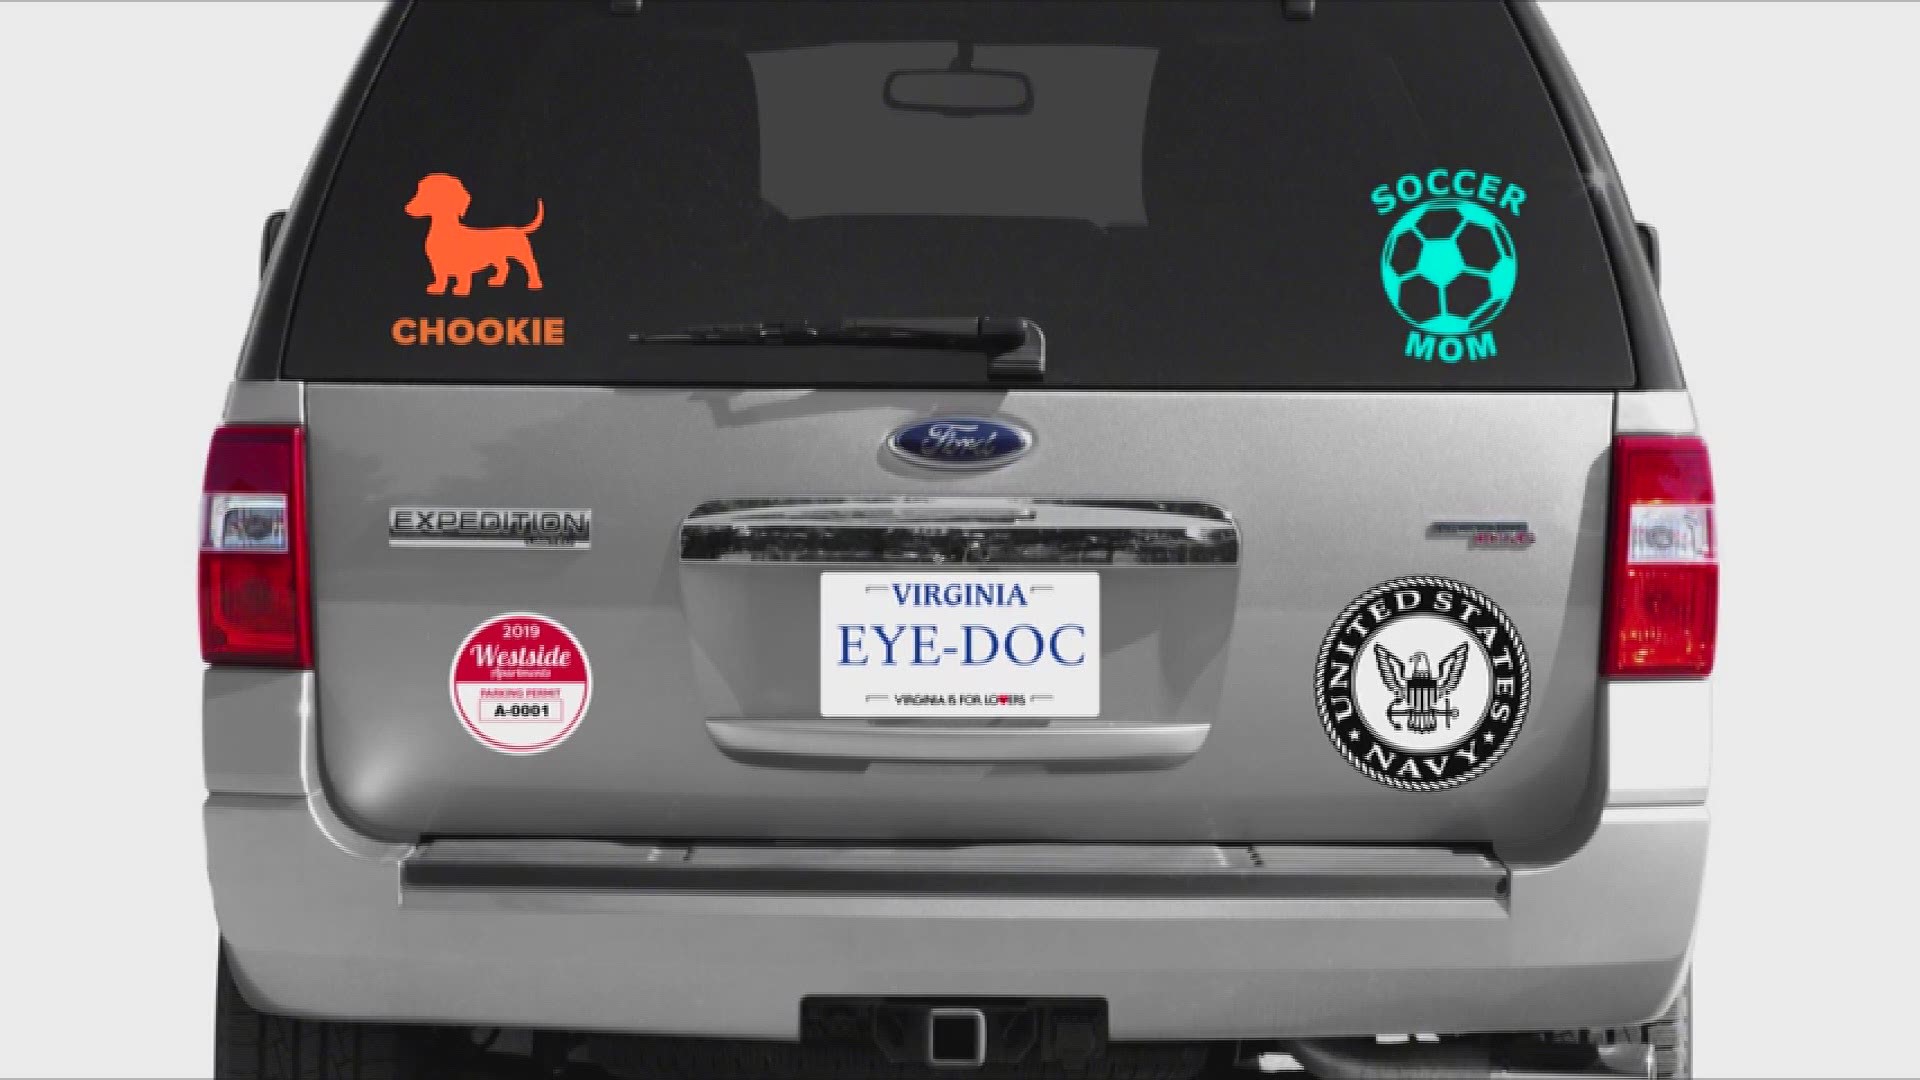 Bumper stickers can tell strangers where you live, what you do, how to speak to your pets and what your schedule might be like.